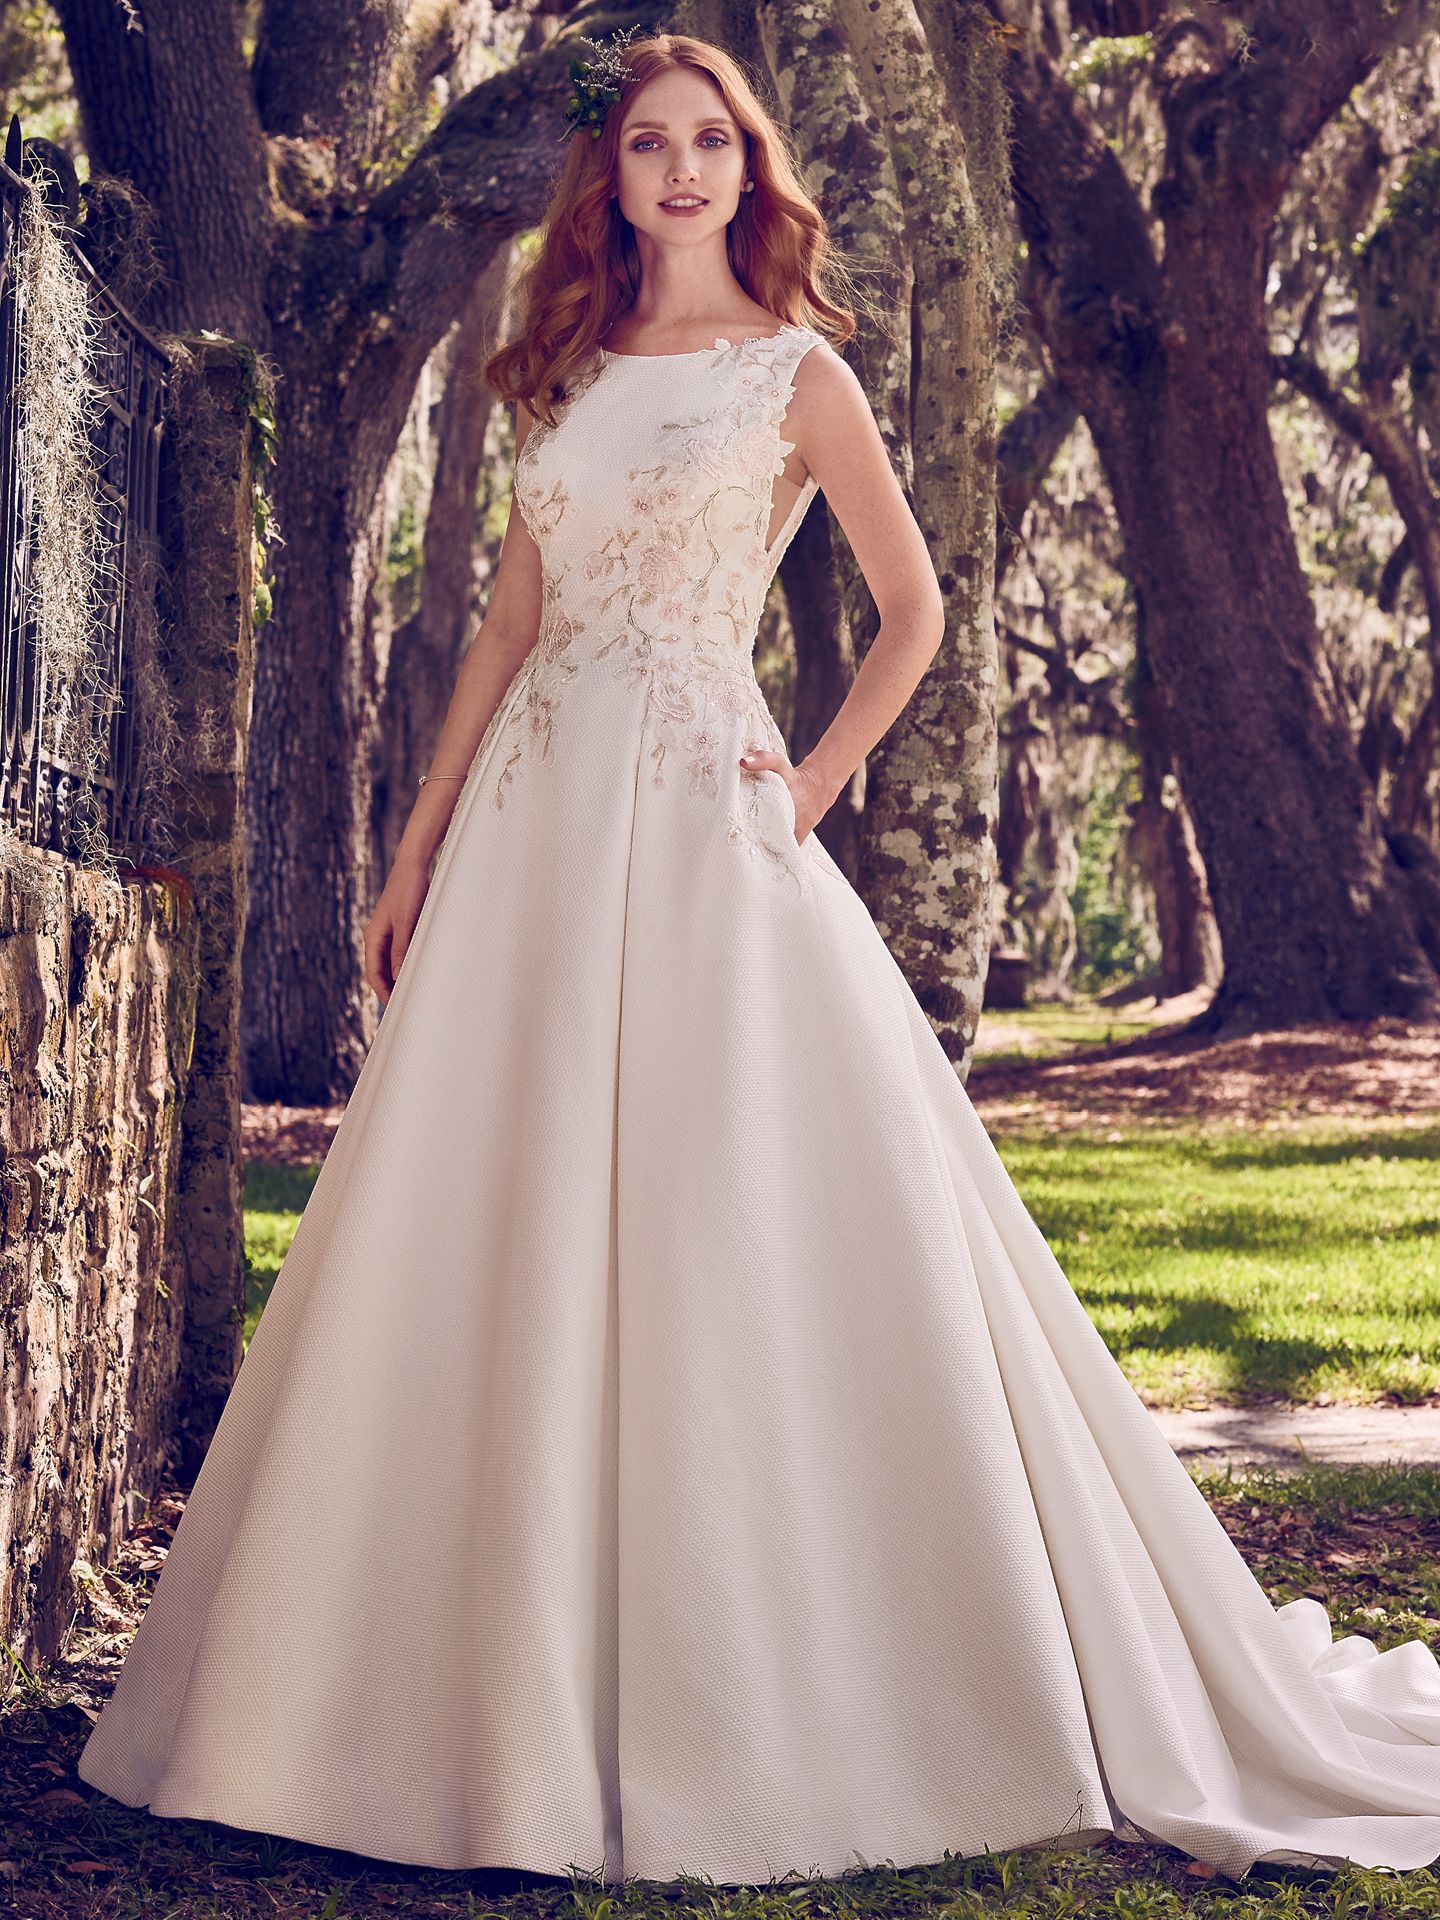 Top 24 Unique Wedding Dresses with Color - Home, Family, Style and Art